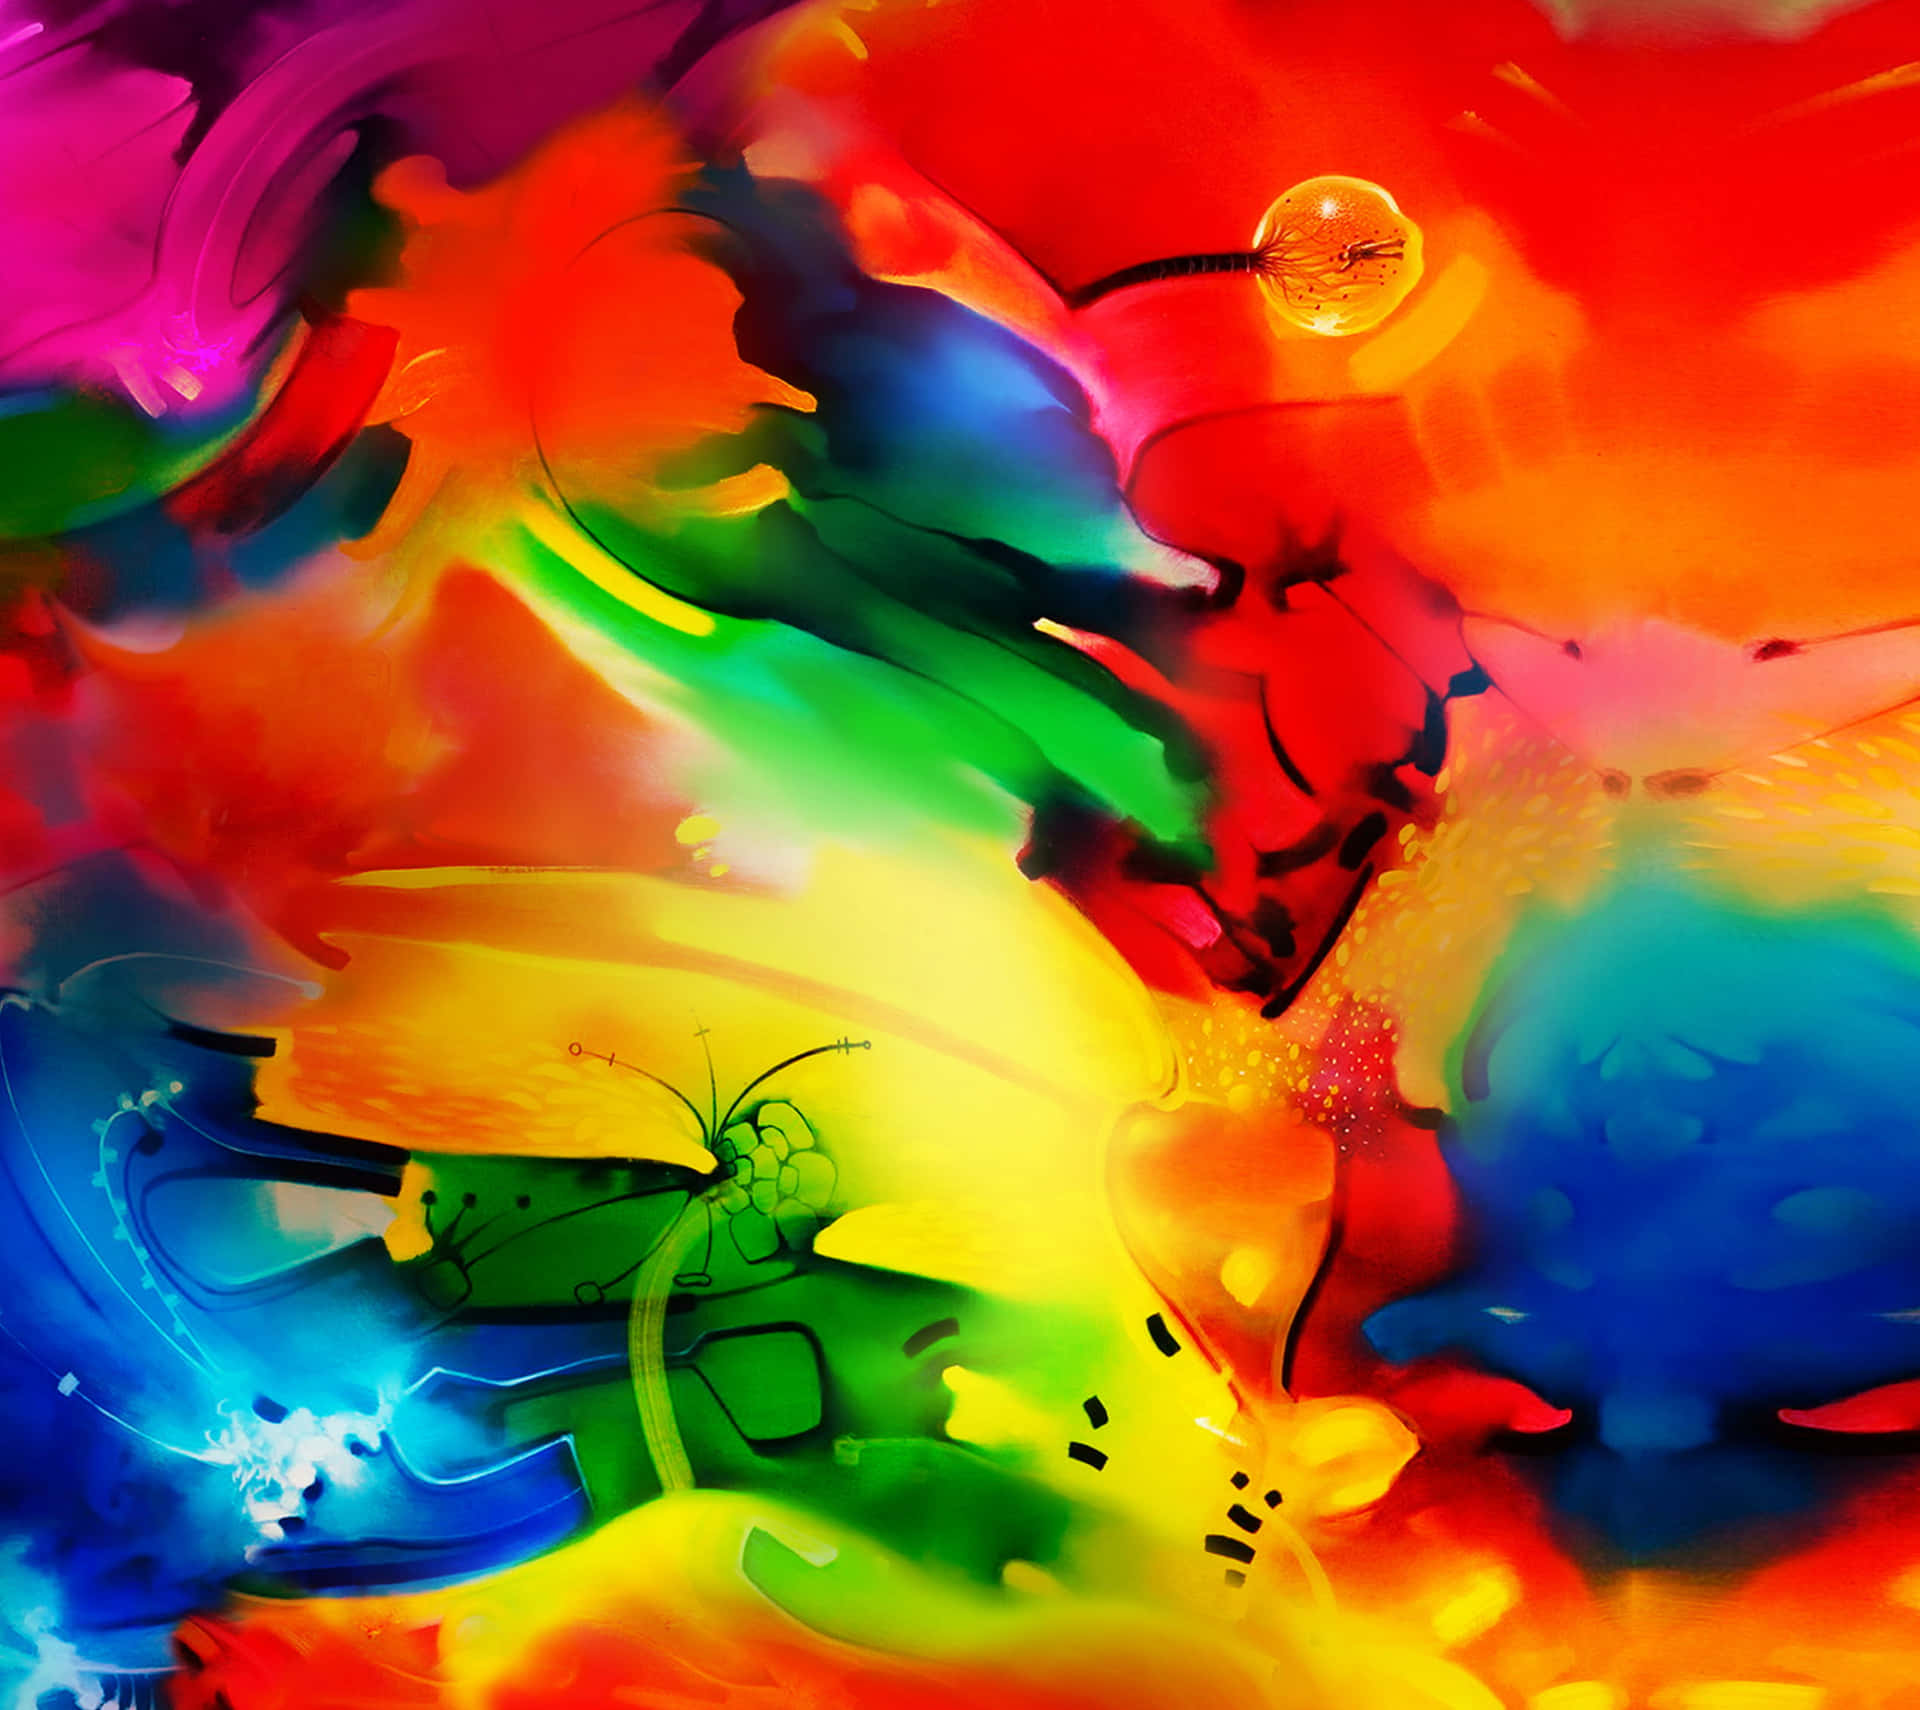 Stunning Galaxy Tab Wallpaper with Vibrant Colors Wallpaper